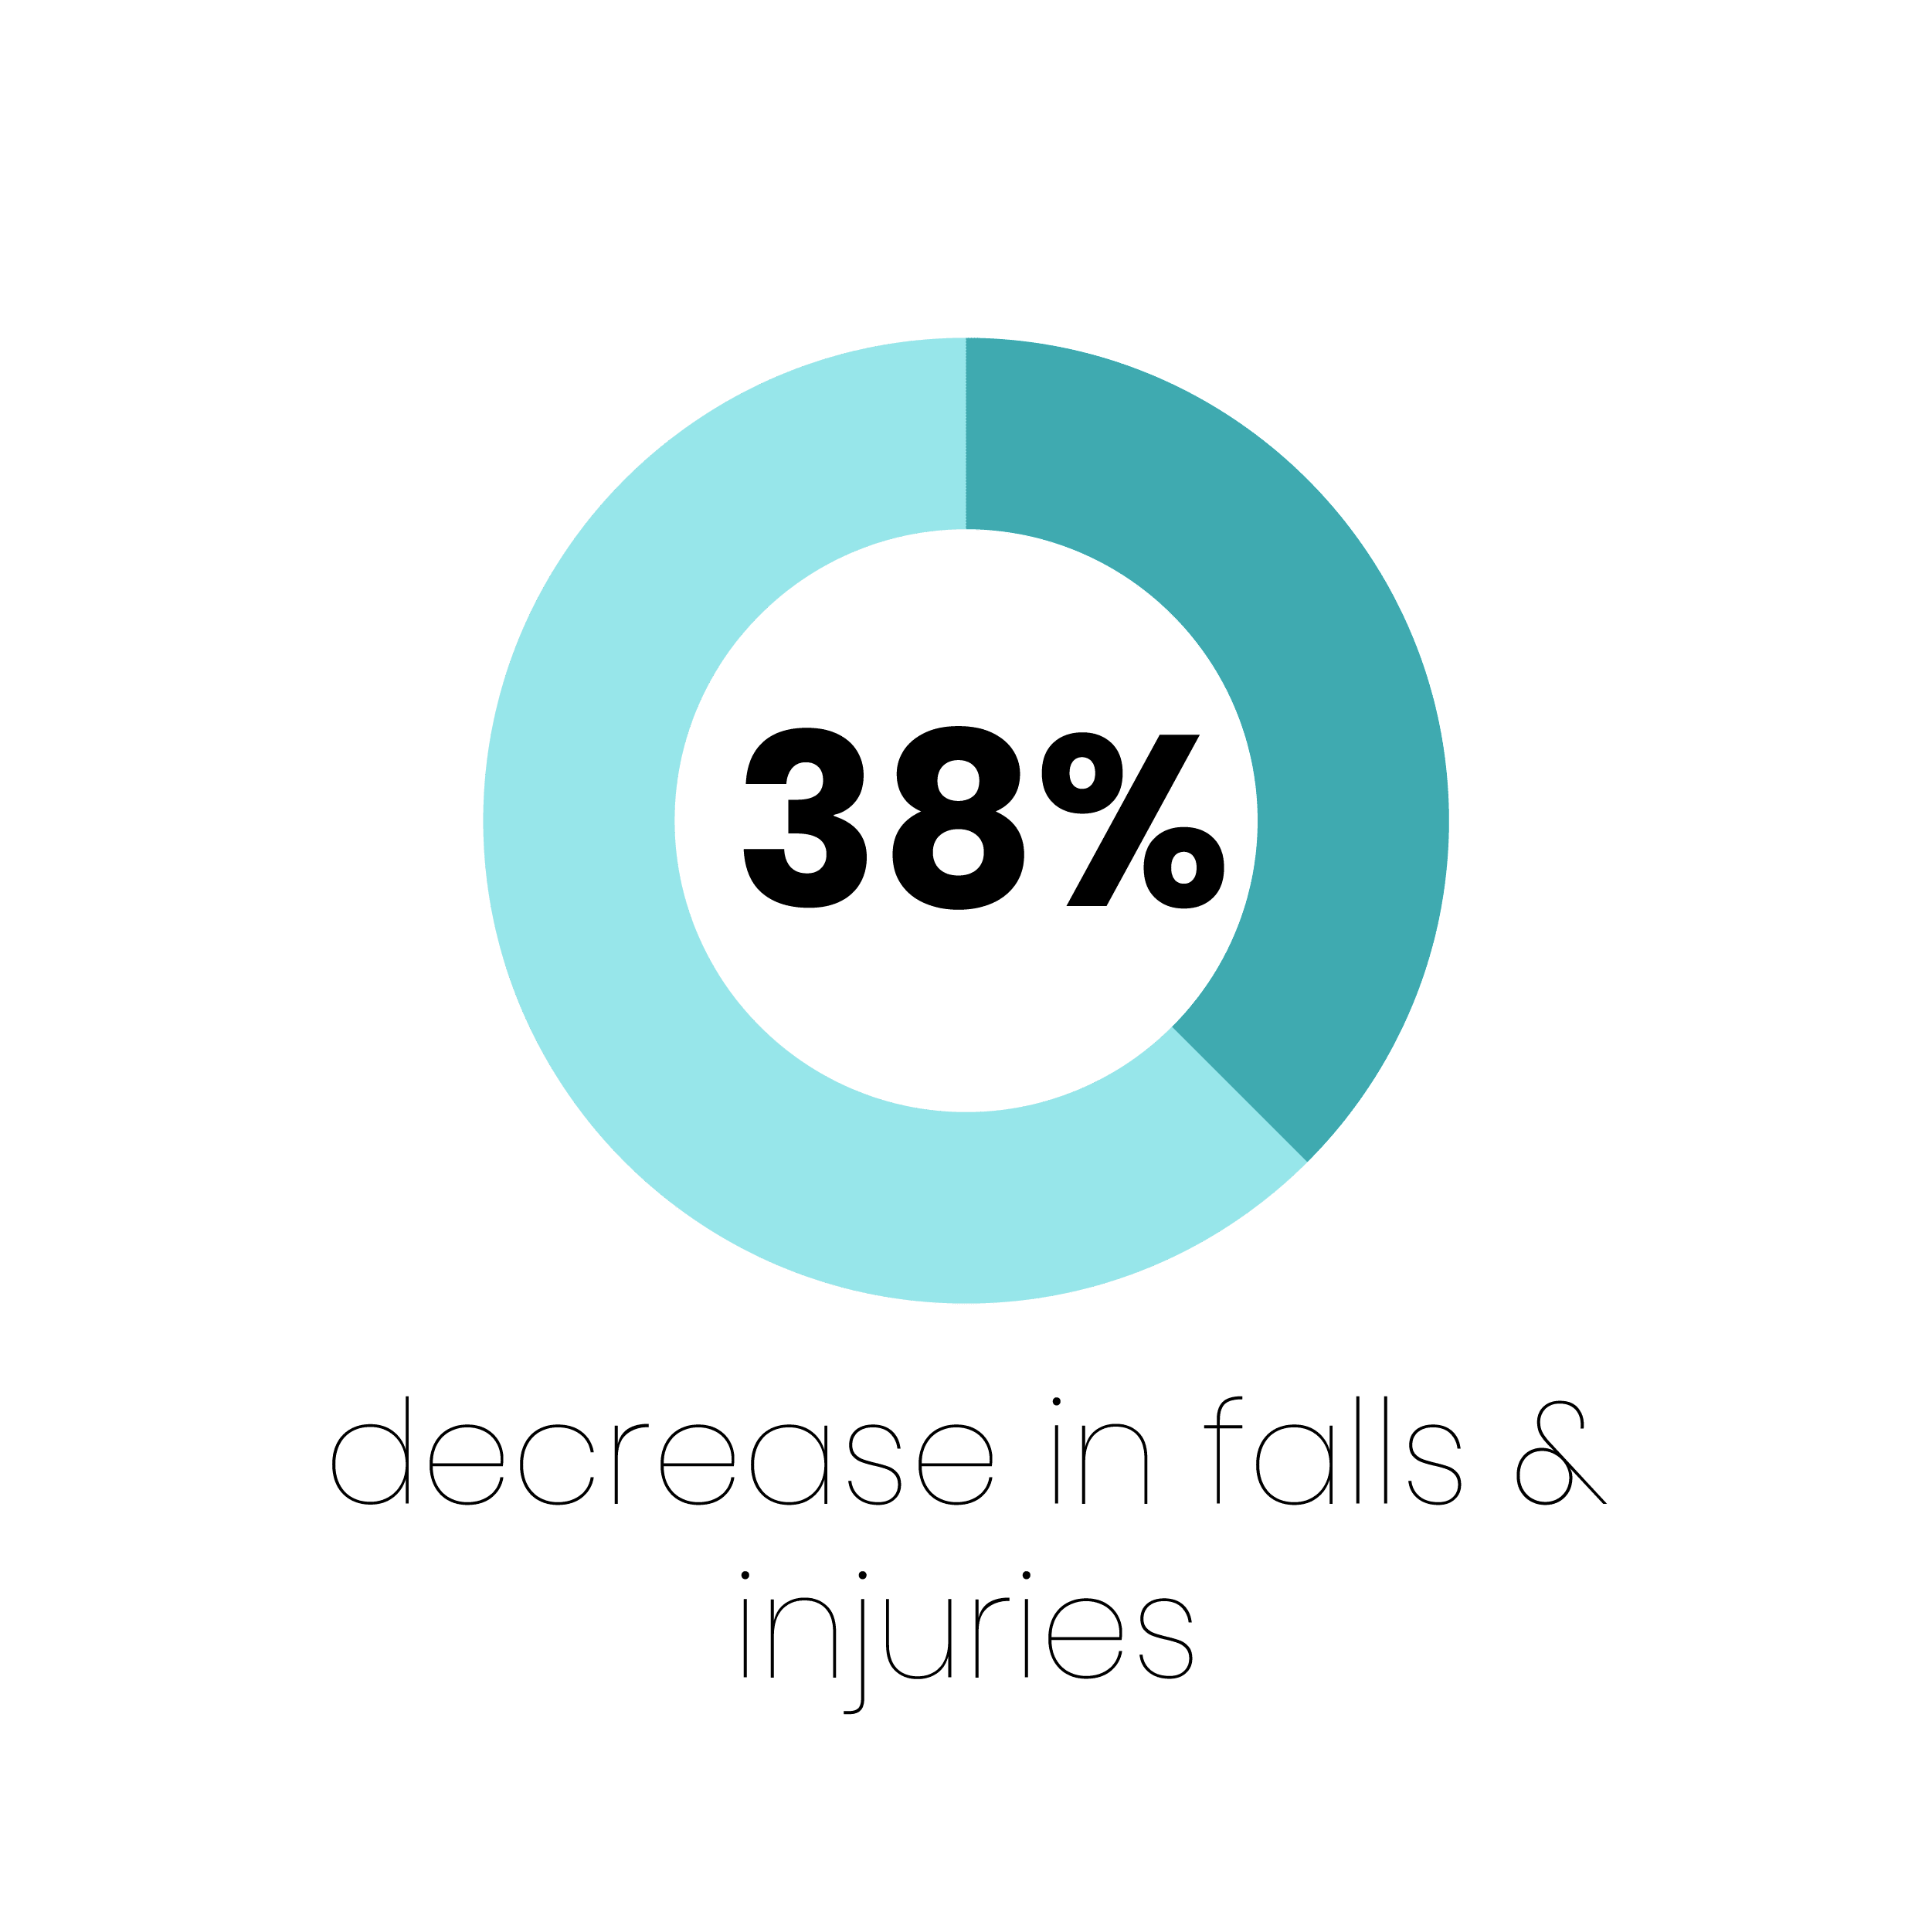 Statistic of decreased falls due to therapy